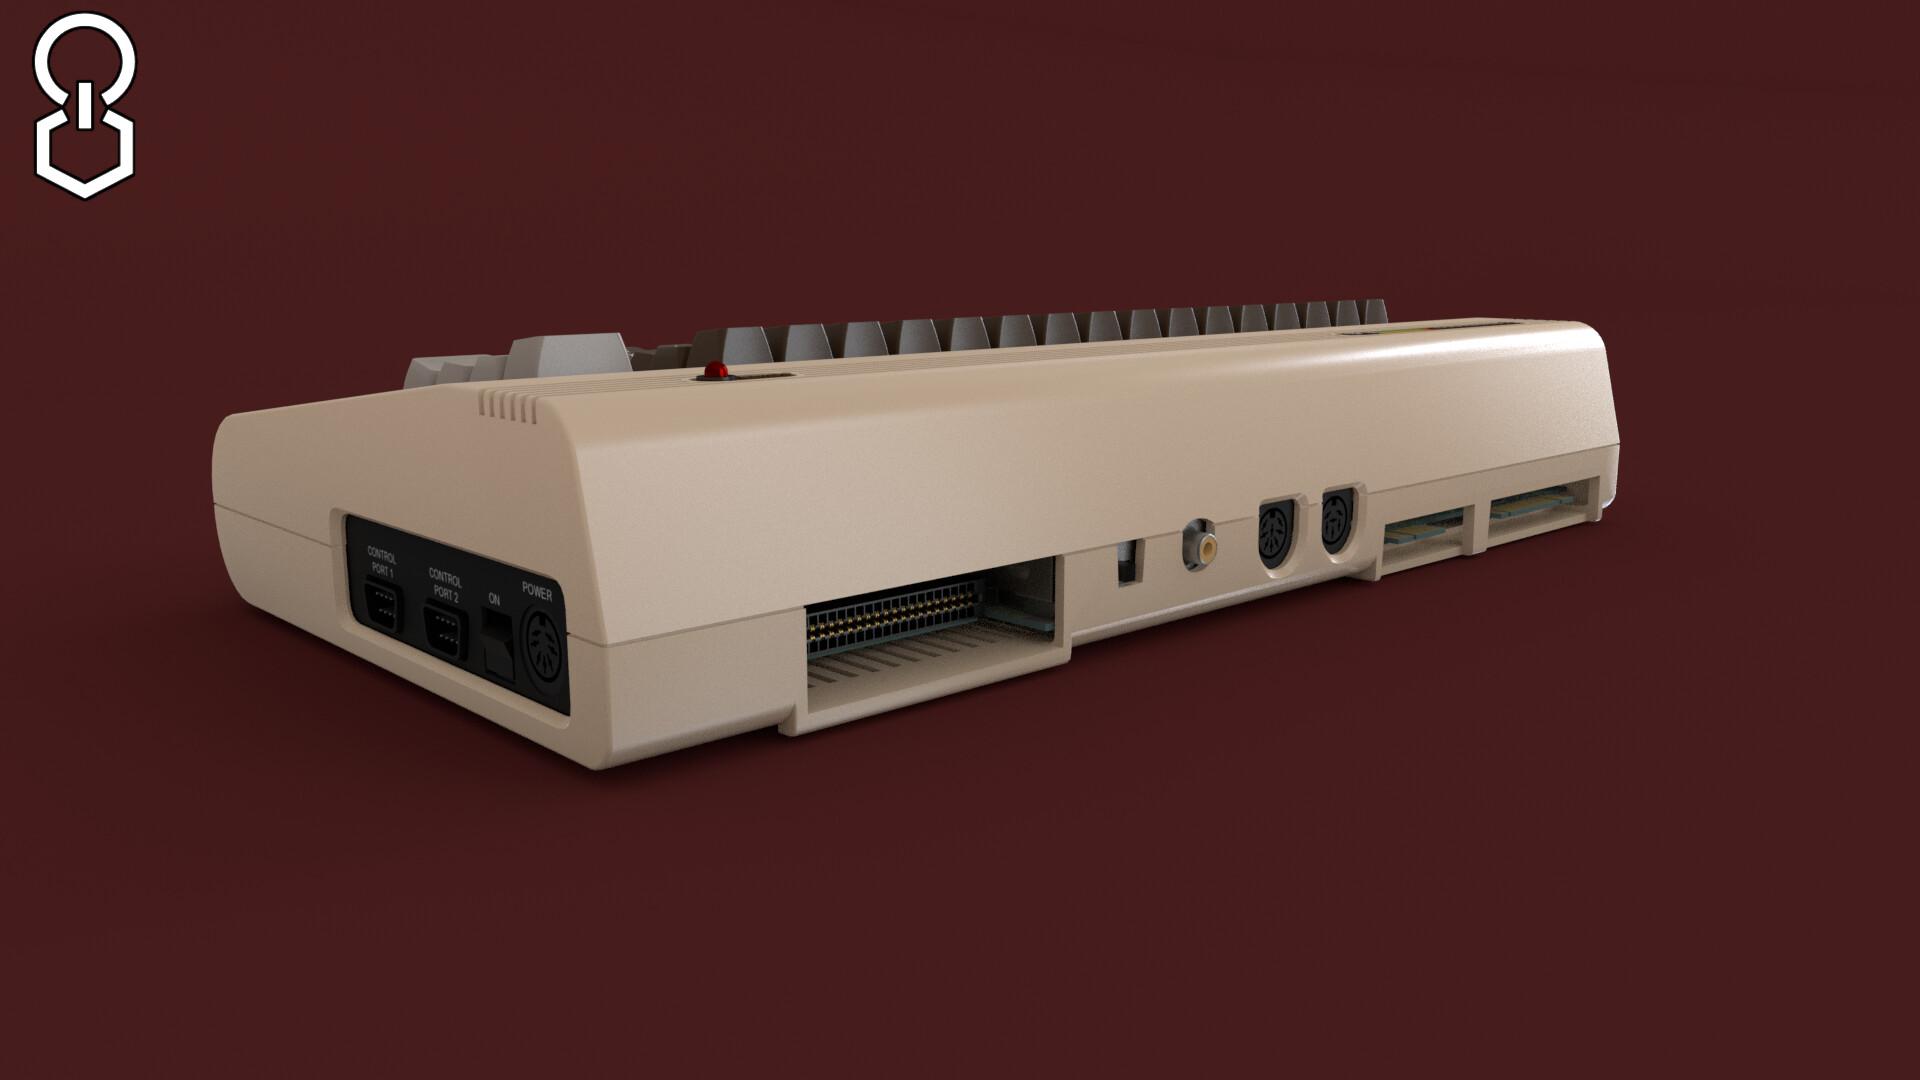 Full-size Commodore 64 revival launching soon, makers say - Polygon